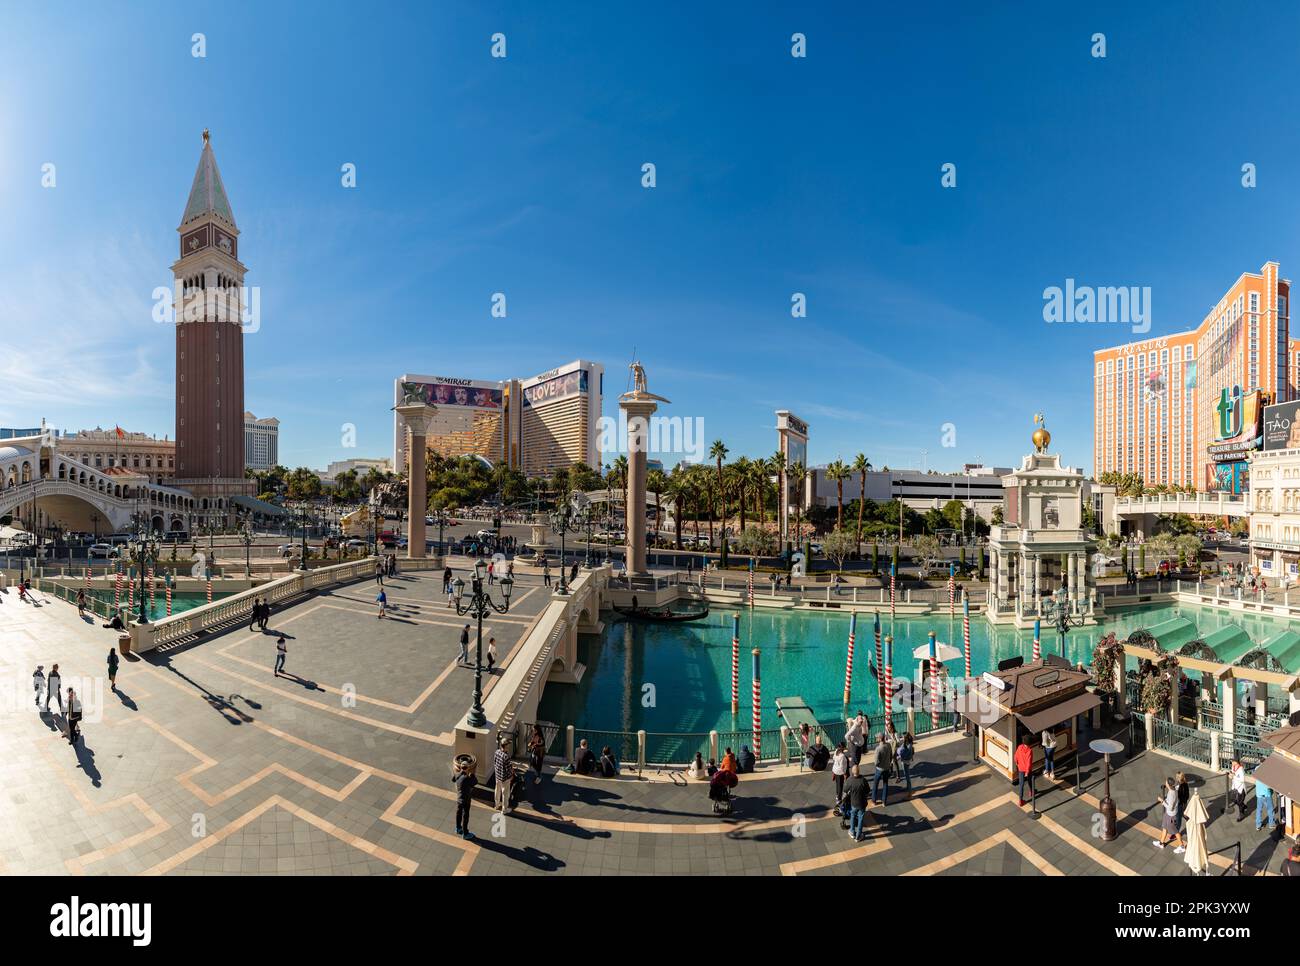 A picture of the Venetian Las Vegas, with the Campanile Tower and the Mirage on the left, and the pond on the right. Stock Photo